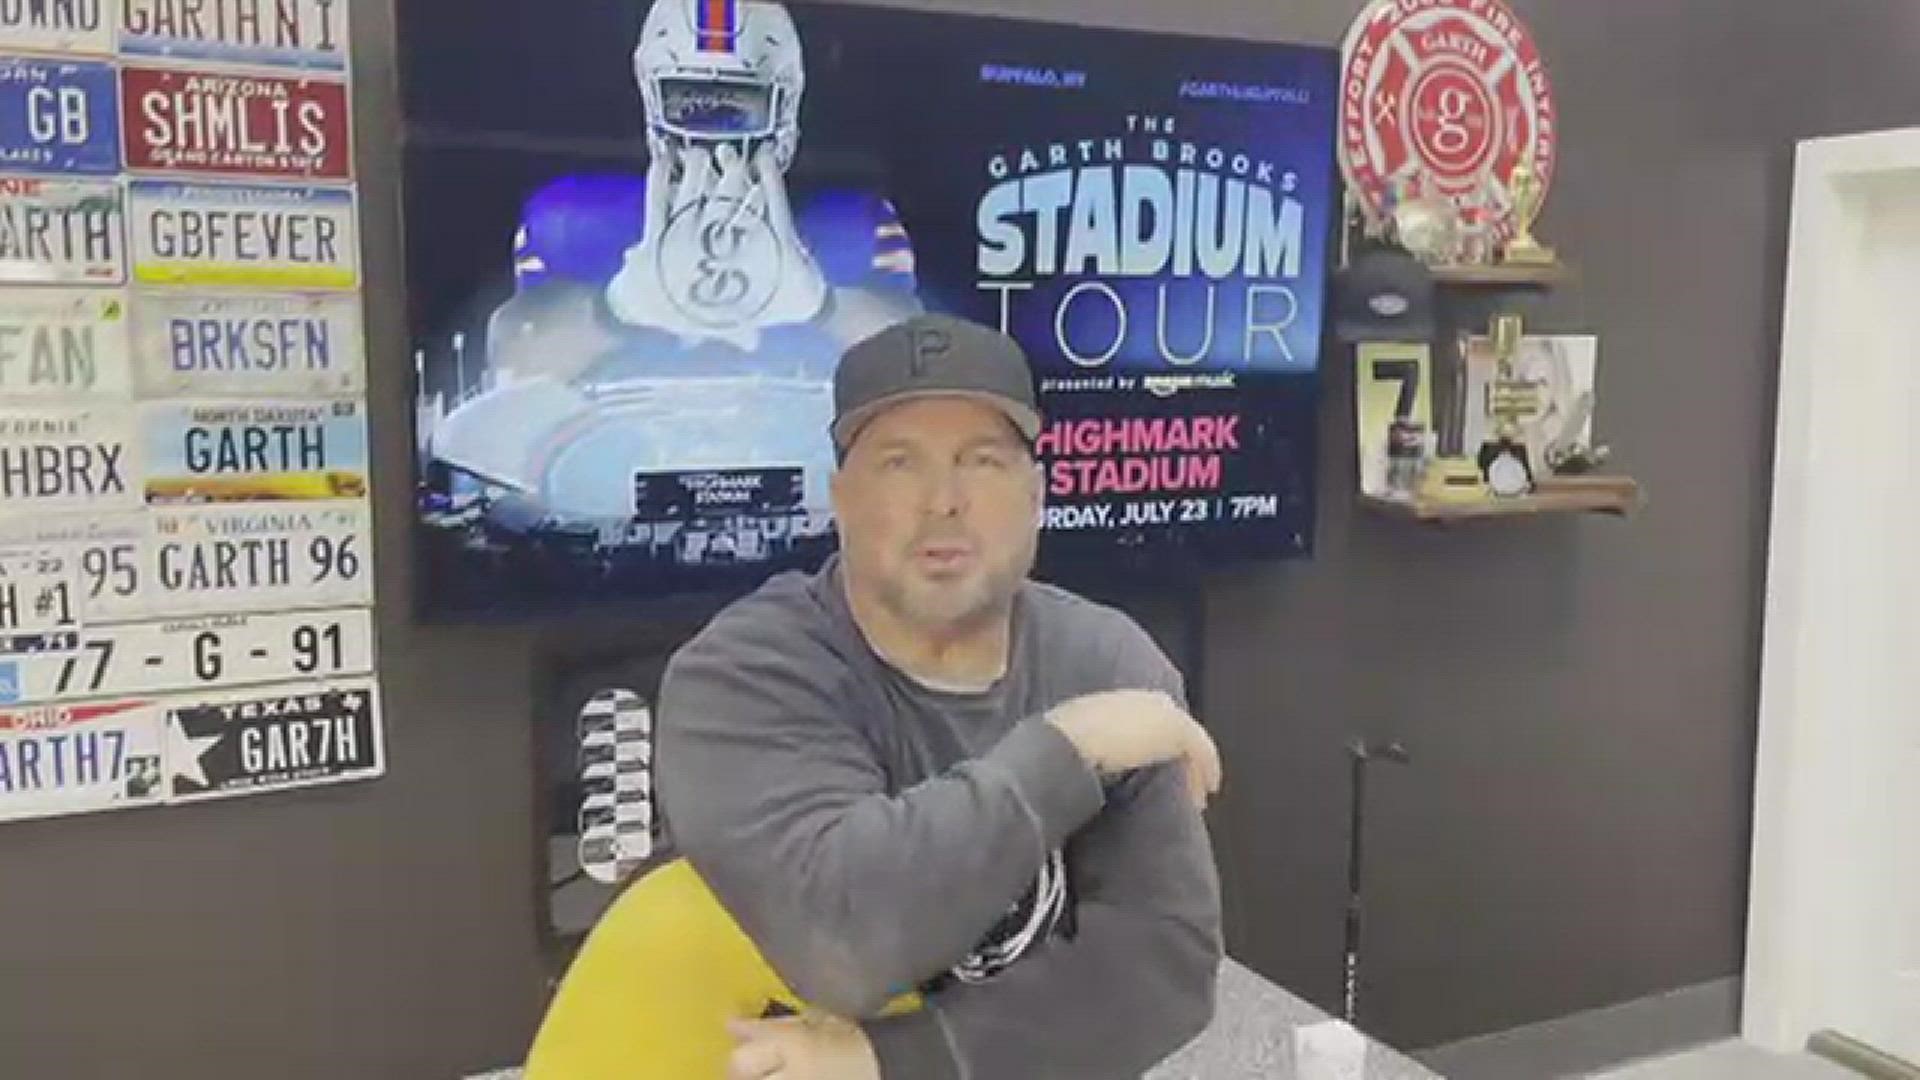 Garth Brooks is coming to WNY this summer. Ahead of the concert, the country music star released a special message for fans.